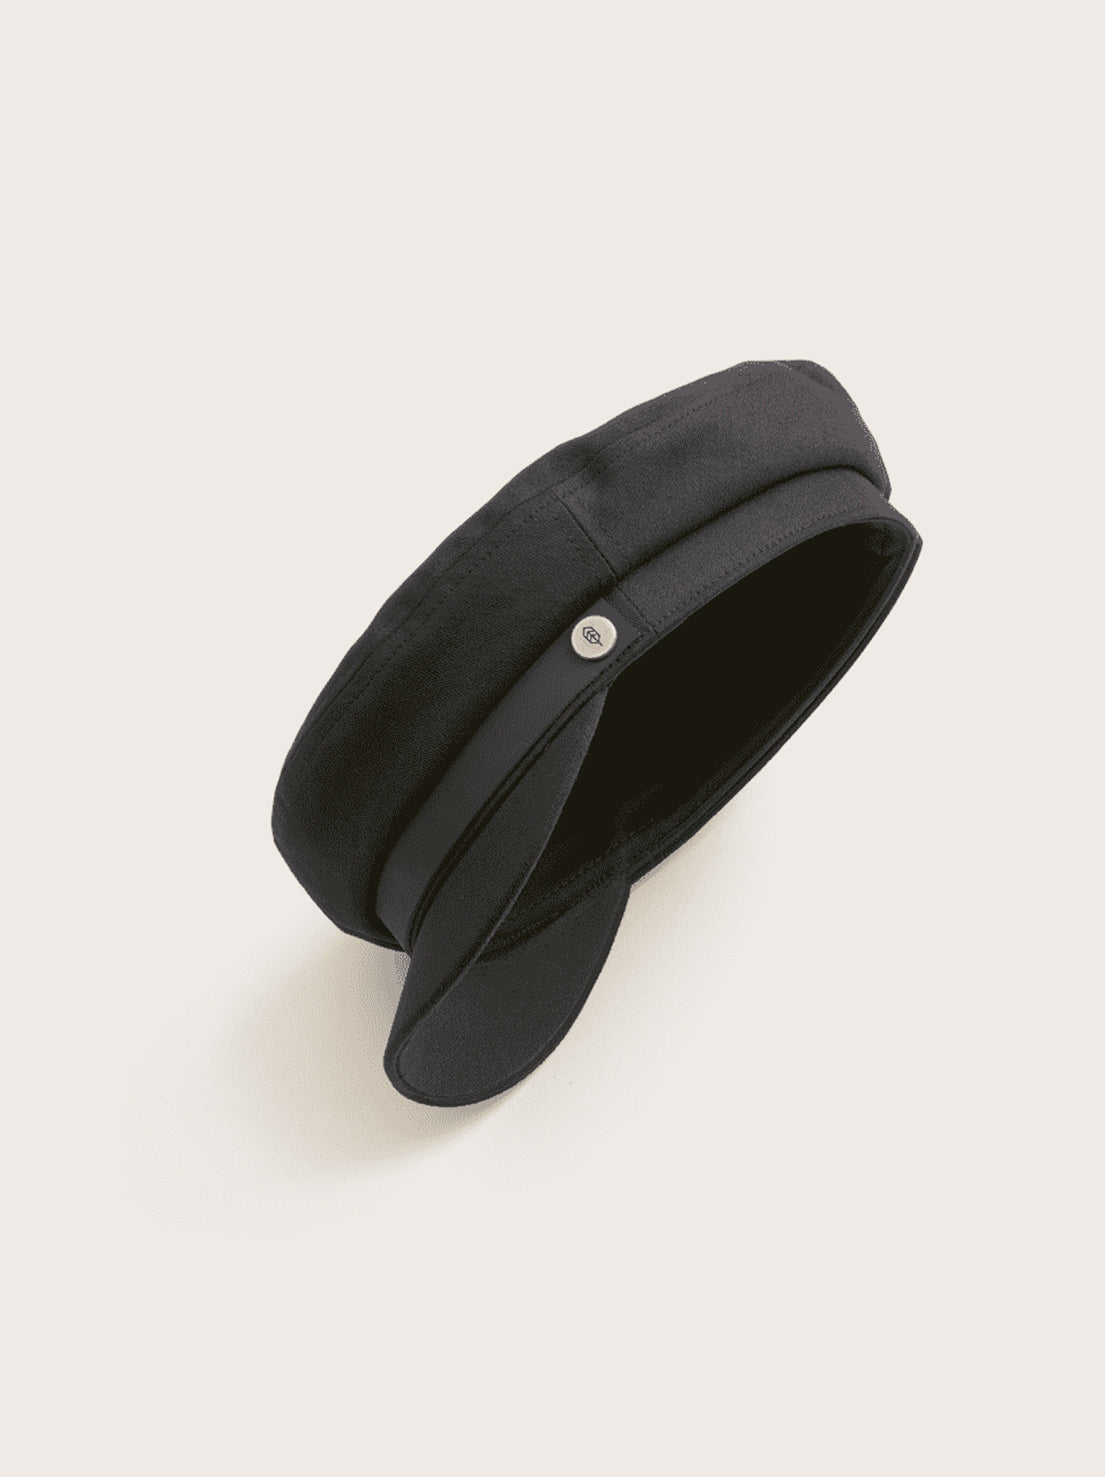 Will and Bear - Foster Field Cap - Black